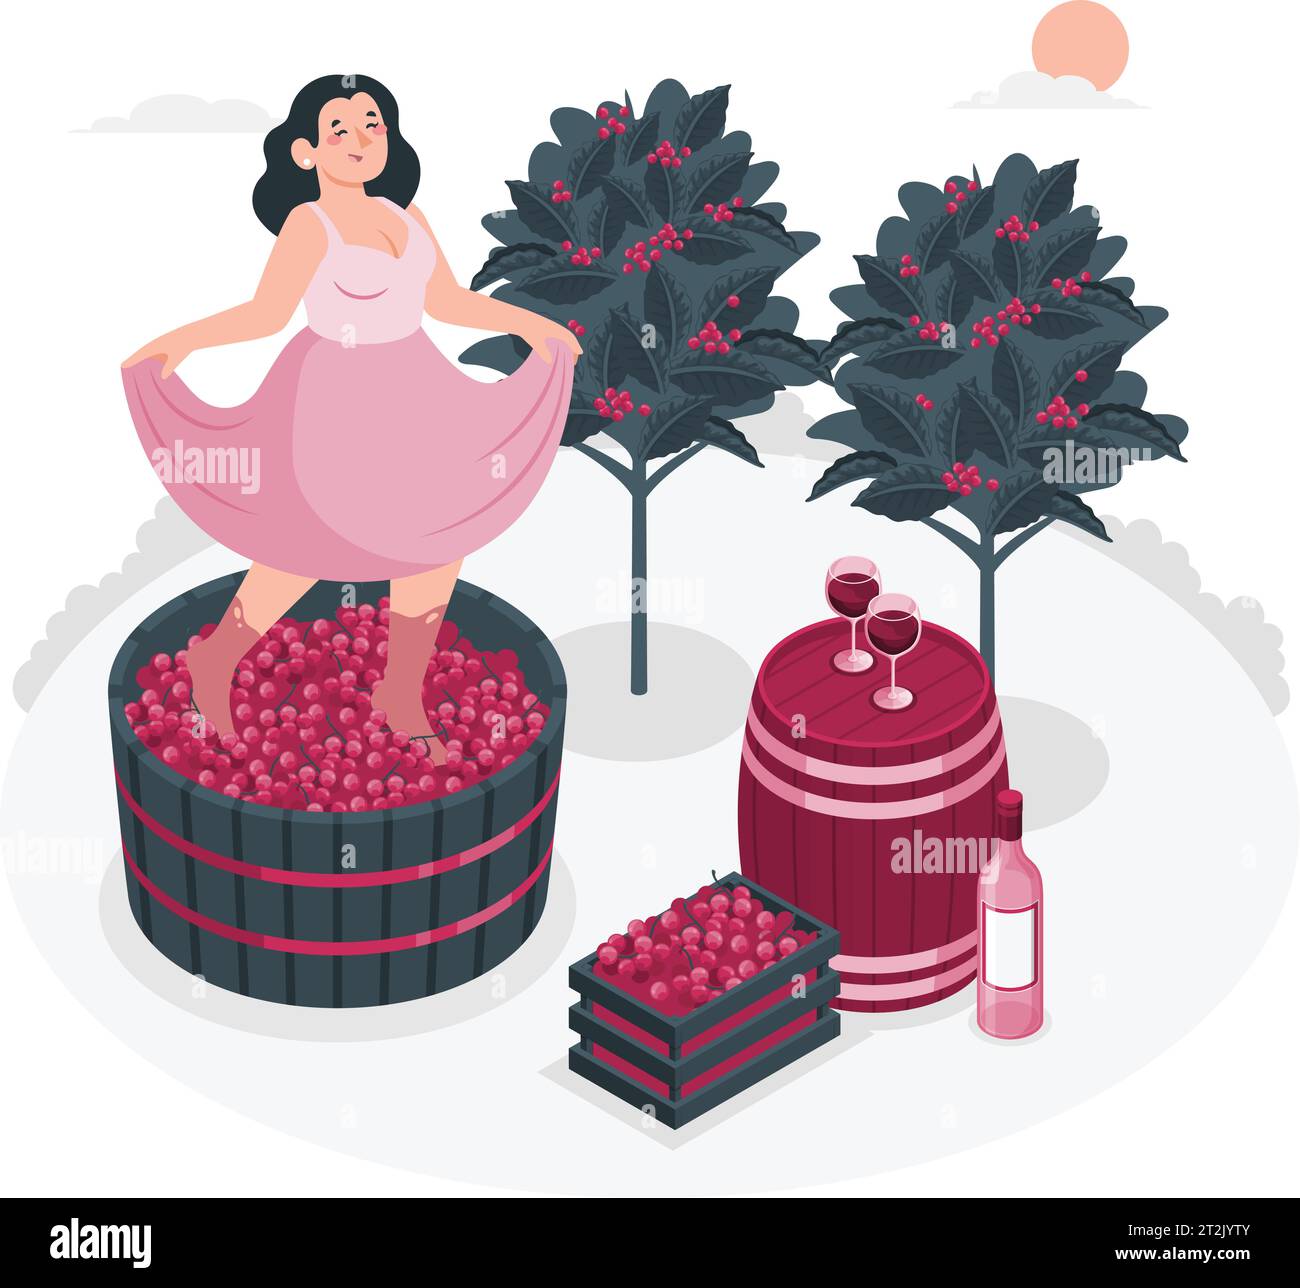 Wine production in traditional winery. Cartoon woman character produce natural vine, grow organic grapes, producing wine product. Stock Vector